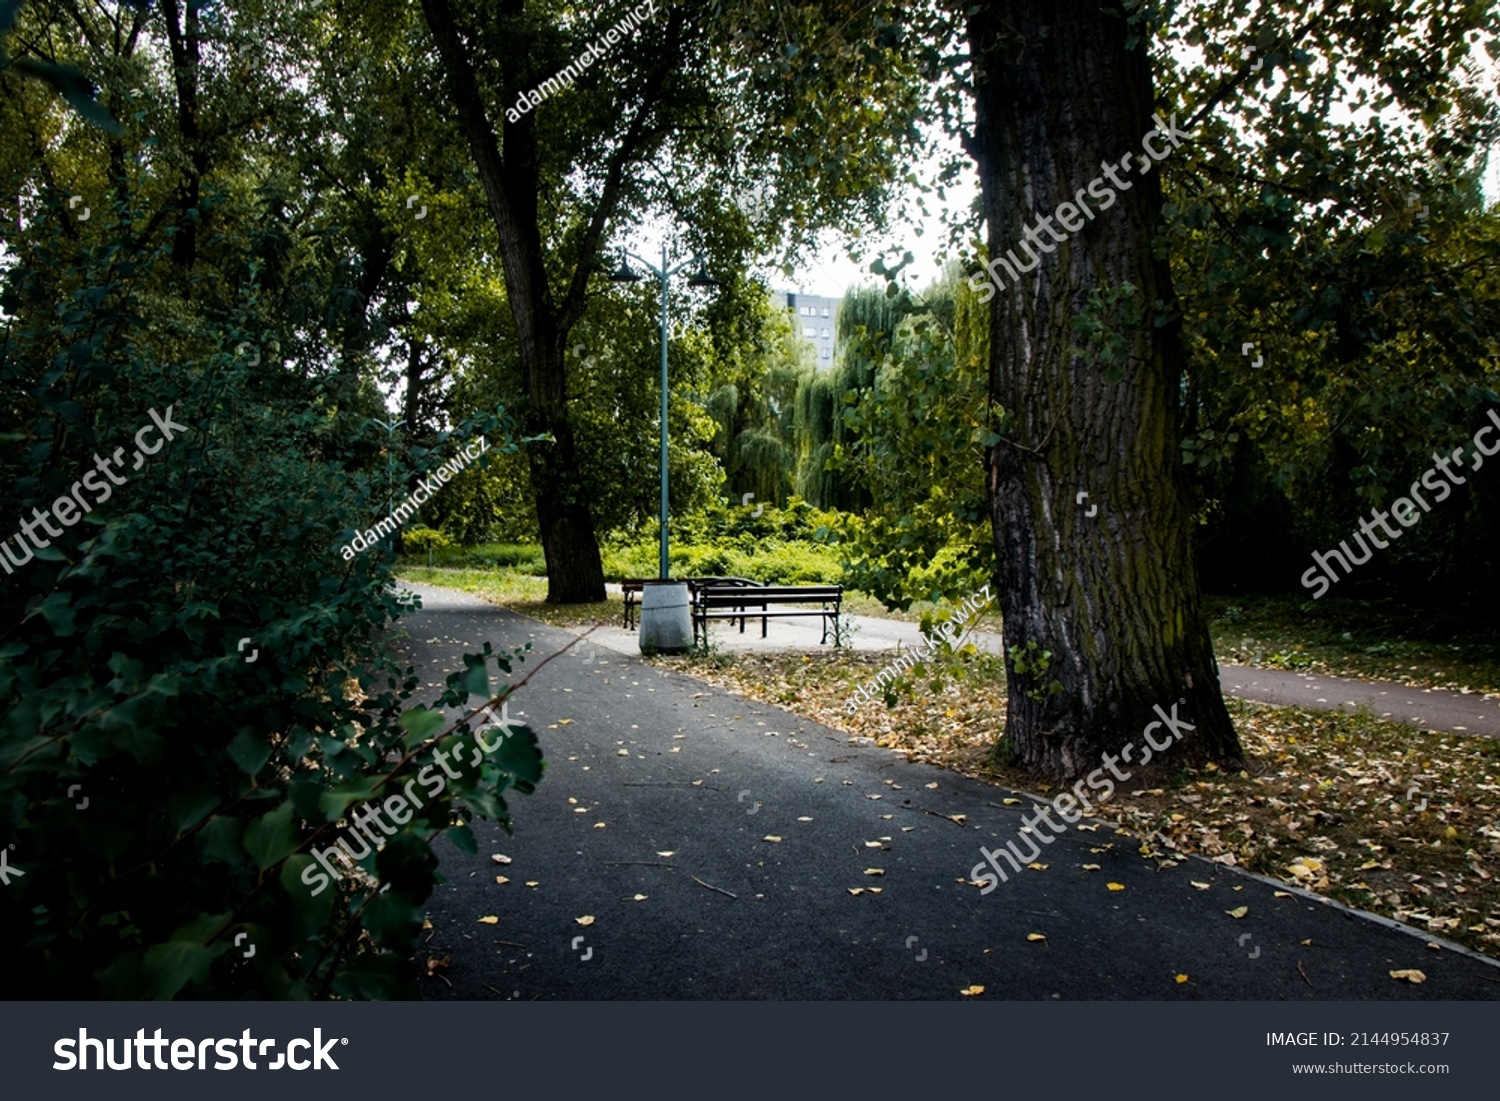 Asphalt footpath and bicycle path surrounded by lawn and trees at the city park #2144954837